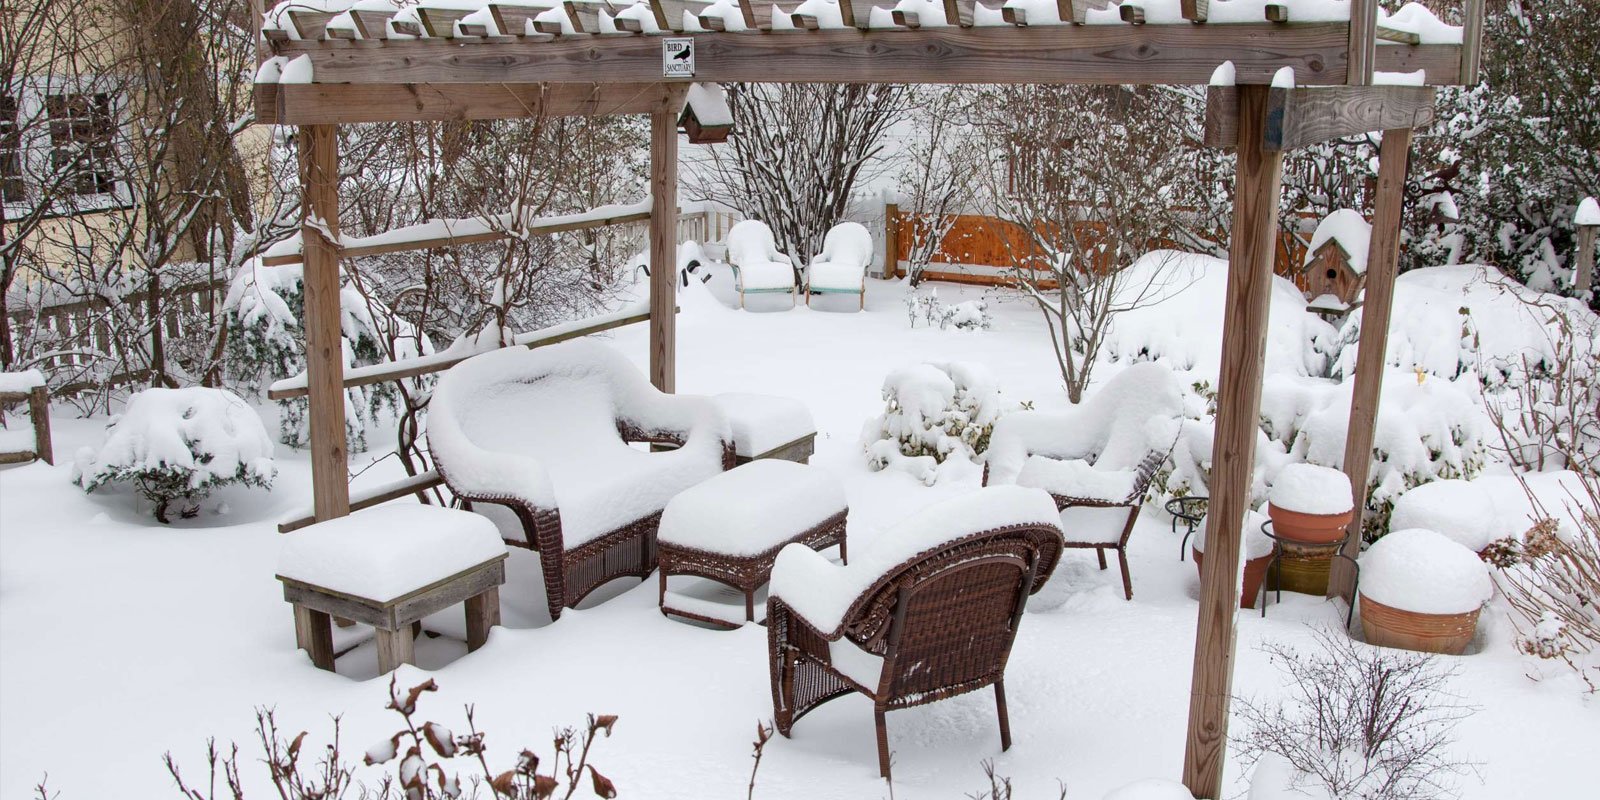 Can I Leave Rattan Furniture Outside In Winter?